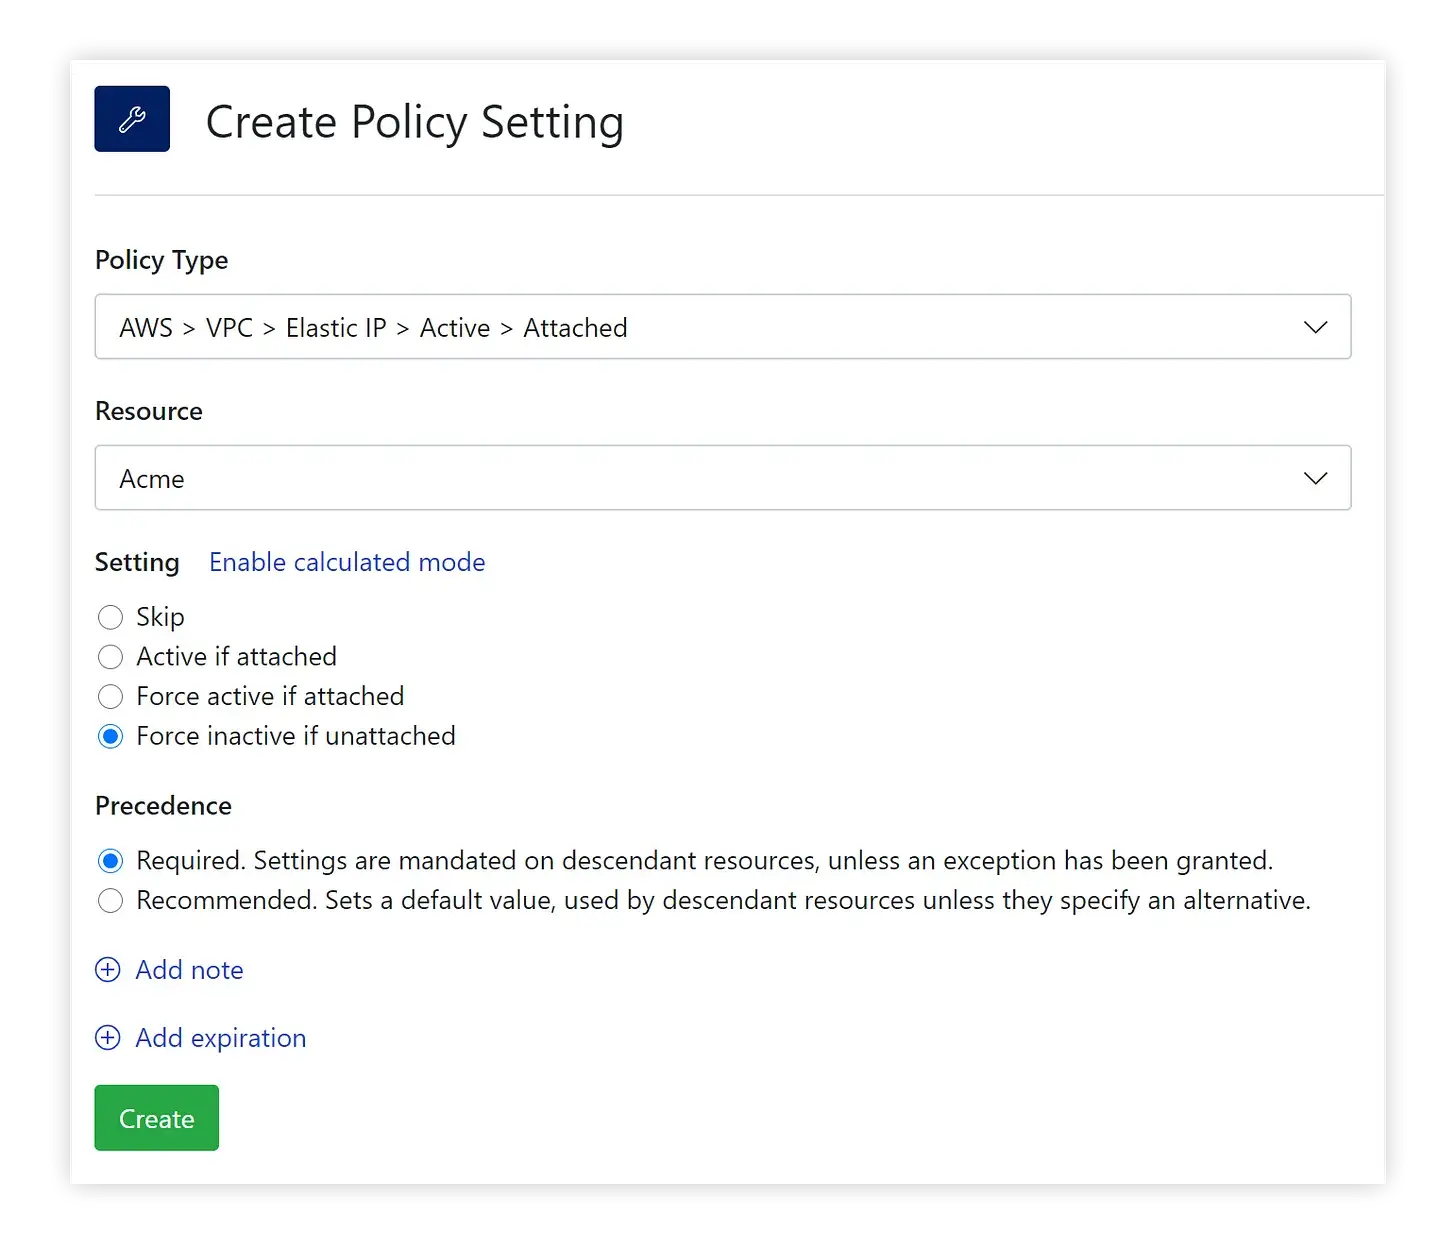 Create a new policy to force any EIP to an “inactive” state if it is unattached.